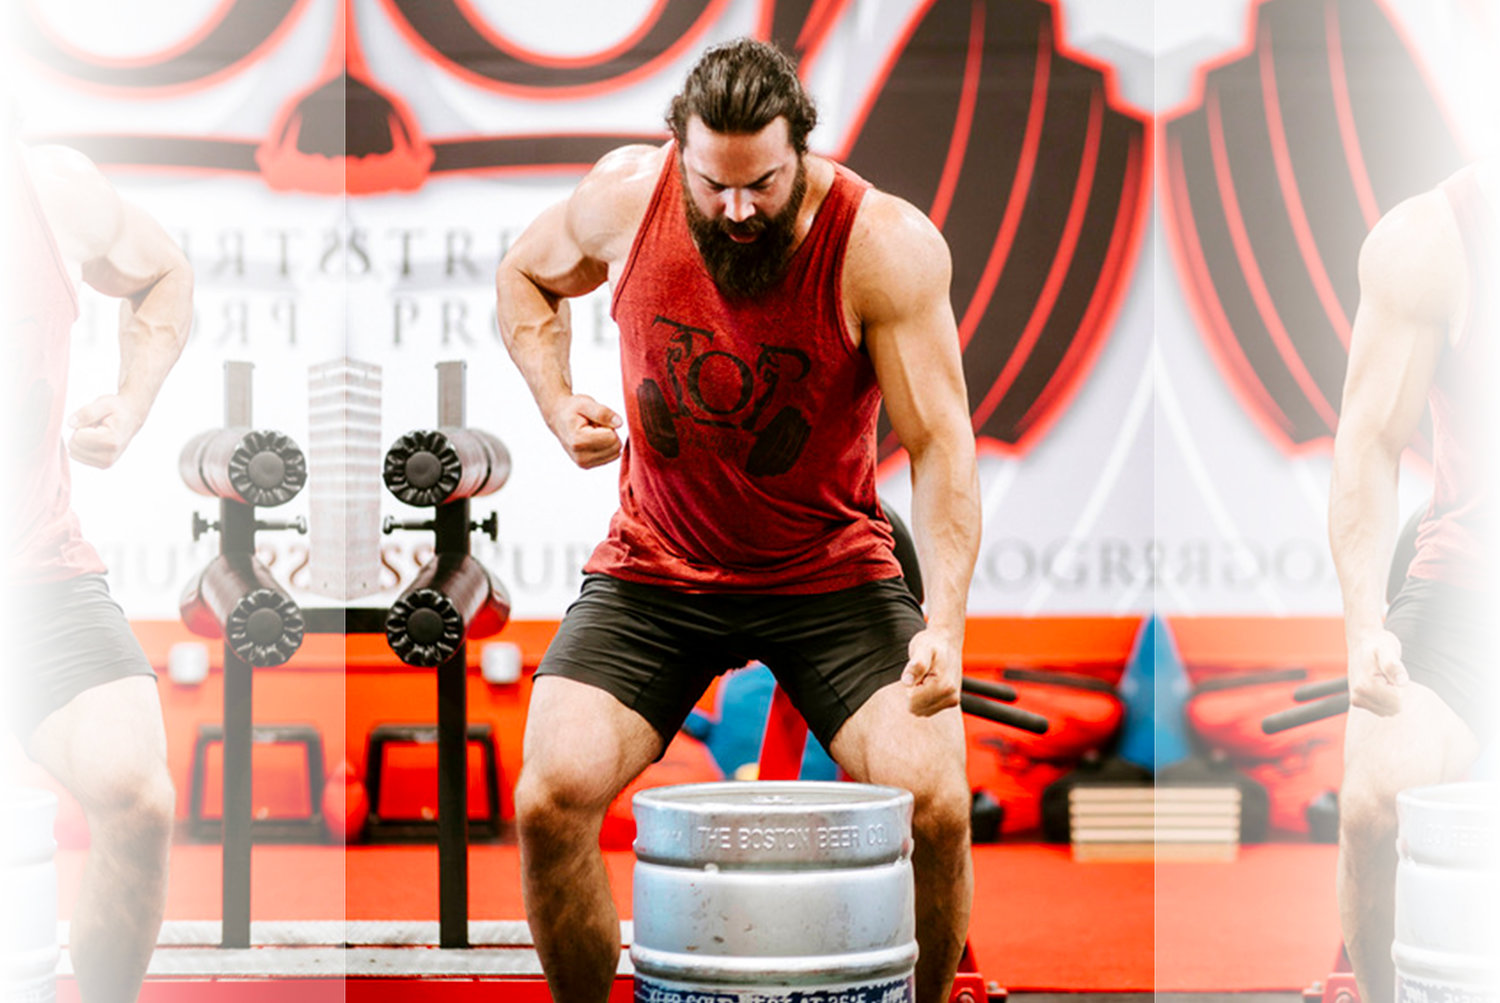 The TOP Strength Project’s Steve Tripp is is also a champion Strongman competitor